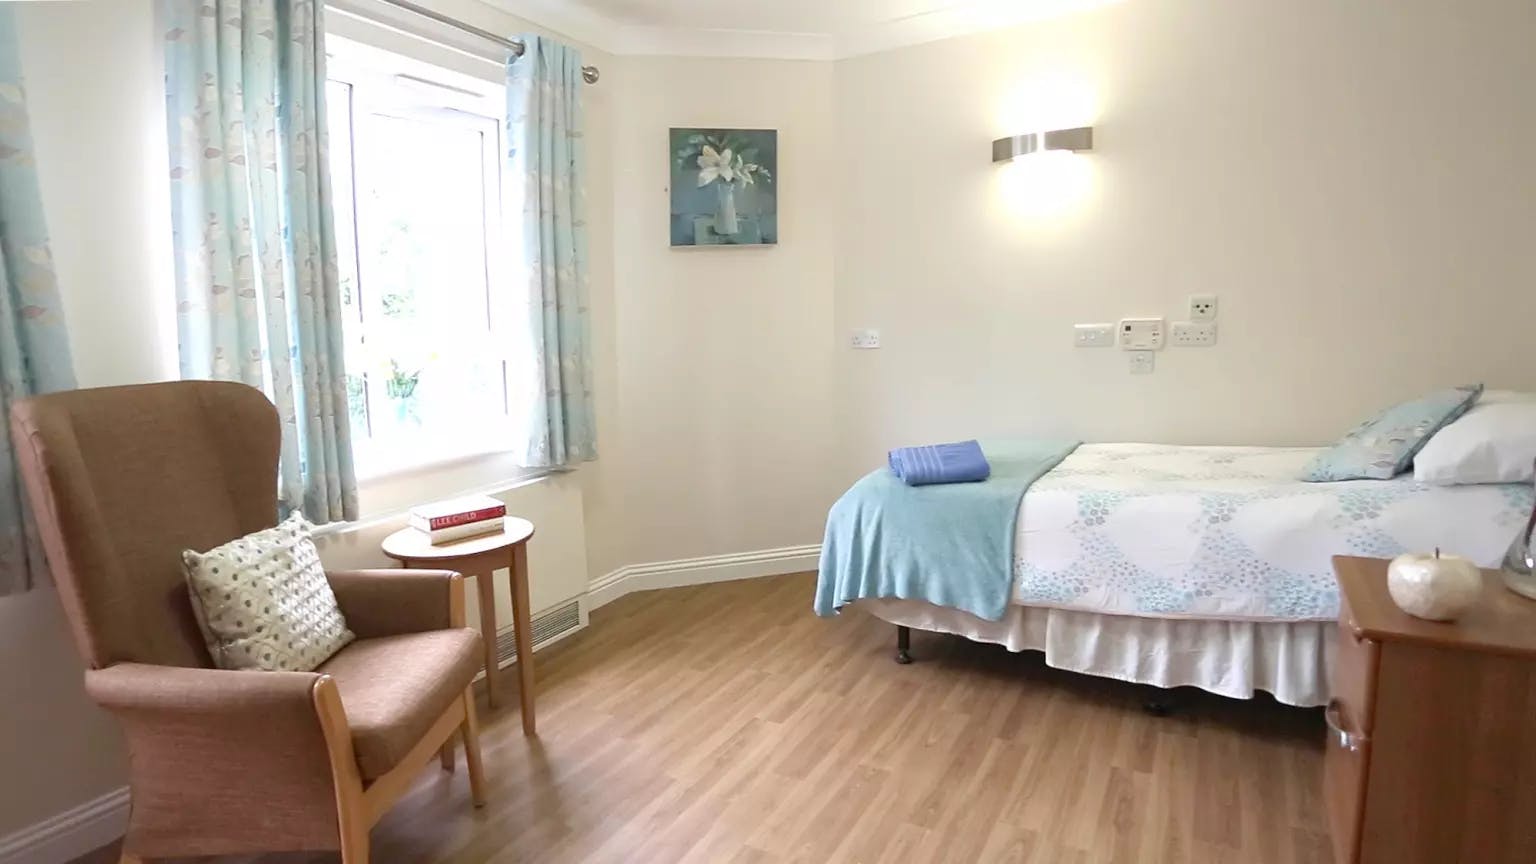 Bedroom of Belmont View care home in Hoddesdon, Hertfordshire